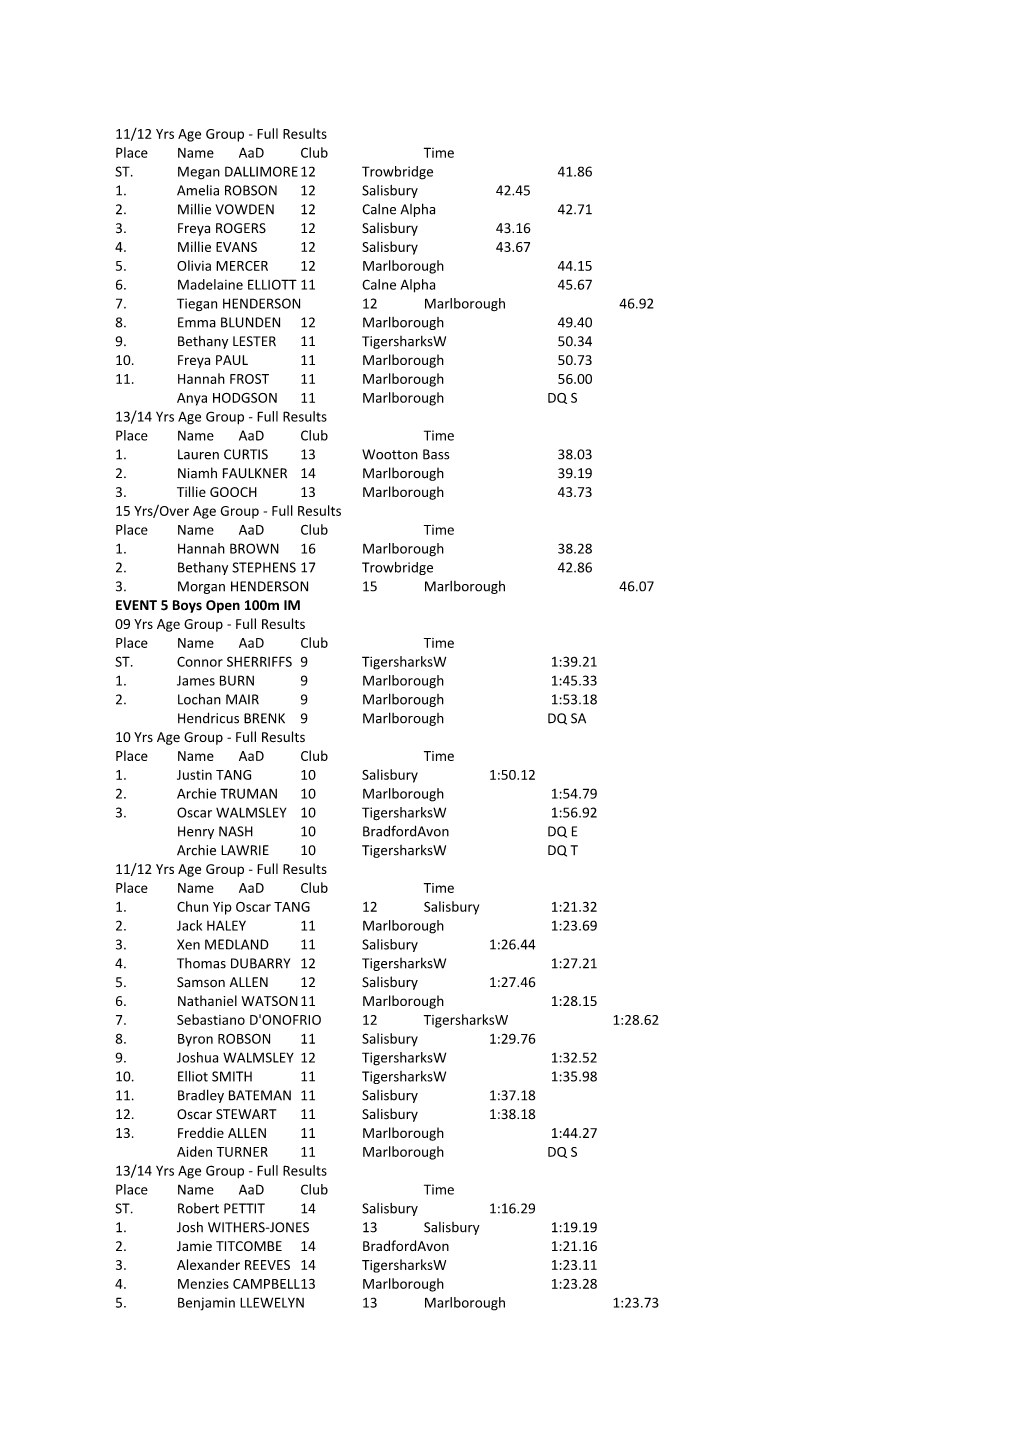 EVENT 1 Boys Open 400M Freestyle